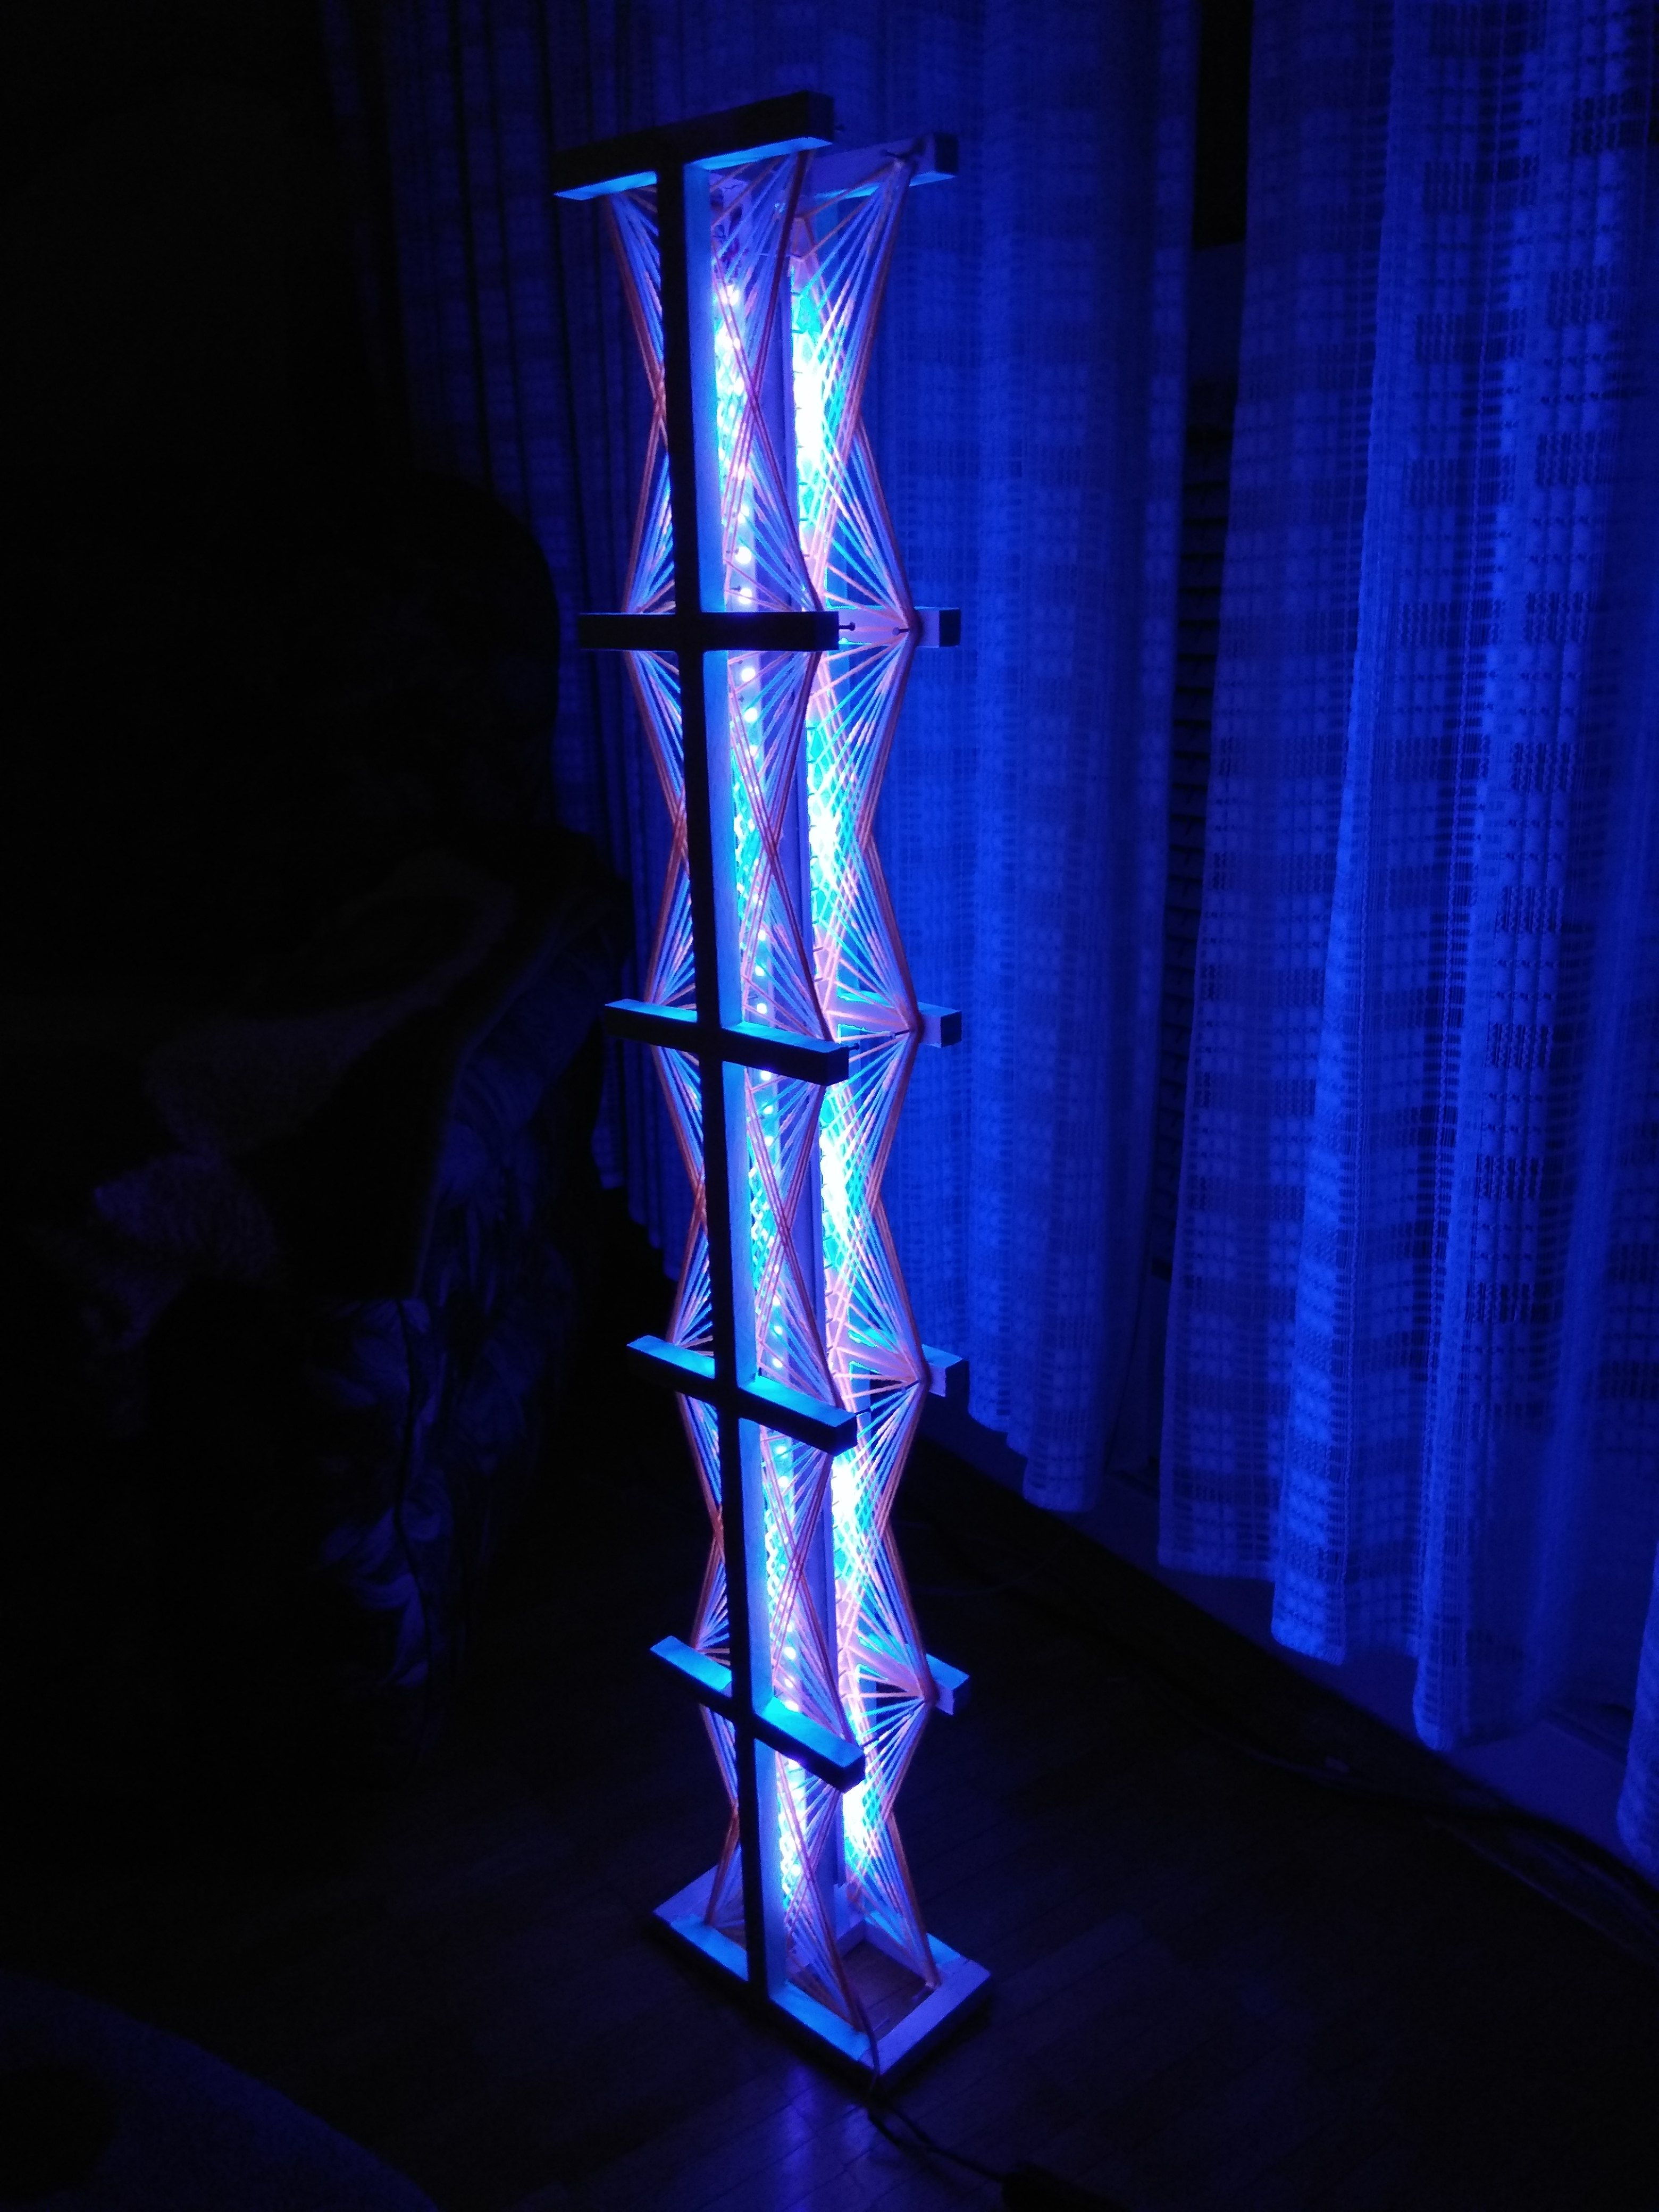 Winter Floor Lamp Ambient Lamp Blacklight Diy within dimensions 3120 X 4160